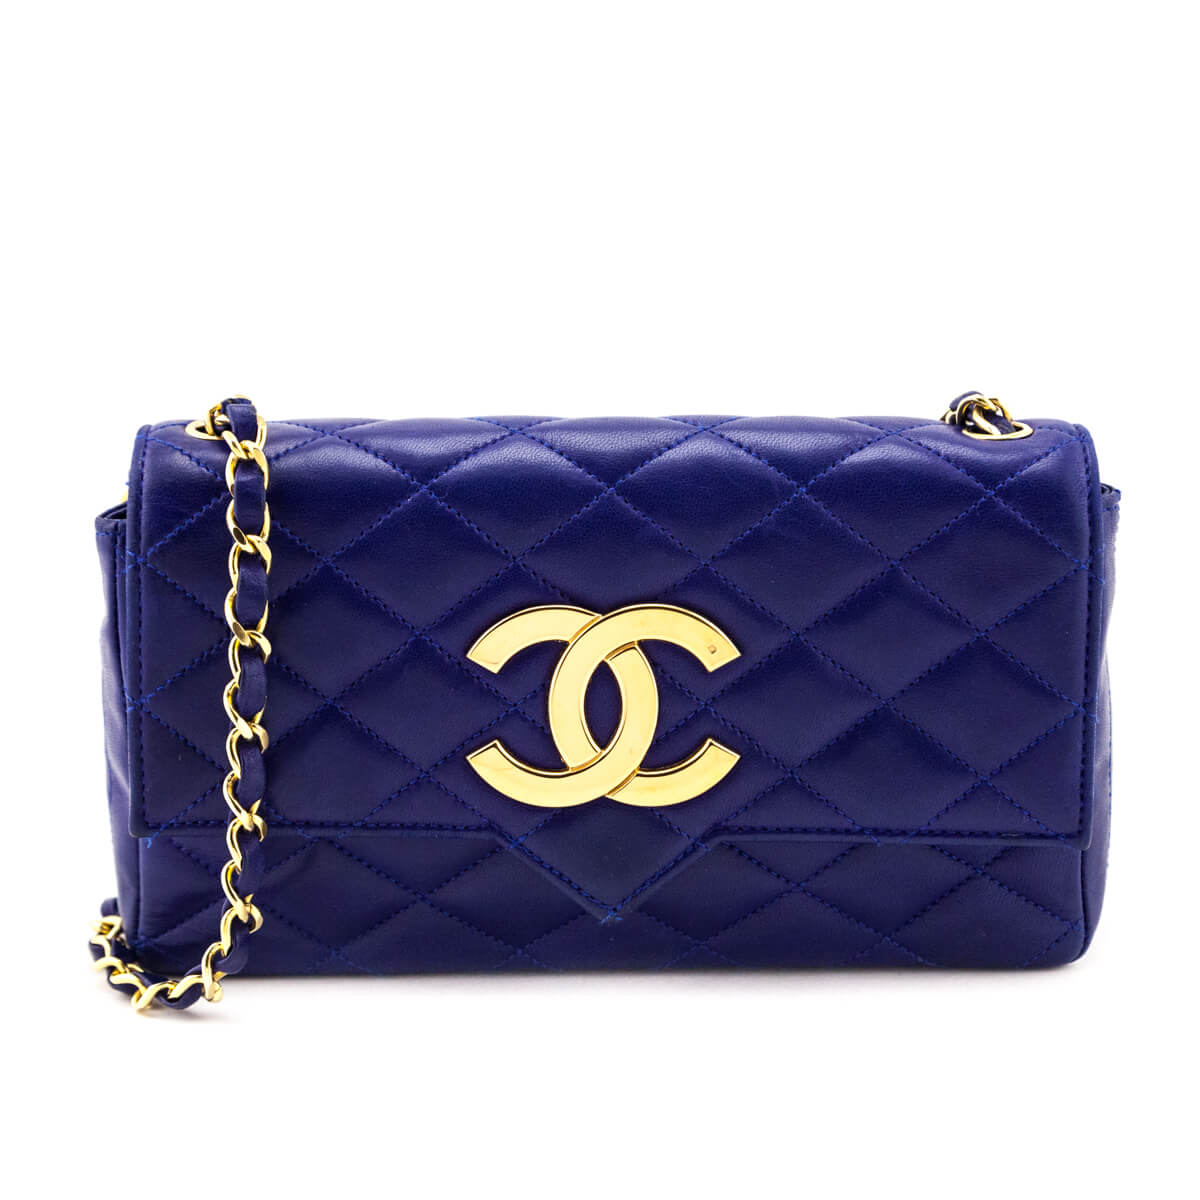 Chanel Quilted Patent Leather Shoulder Bag - Wyld Blue